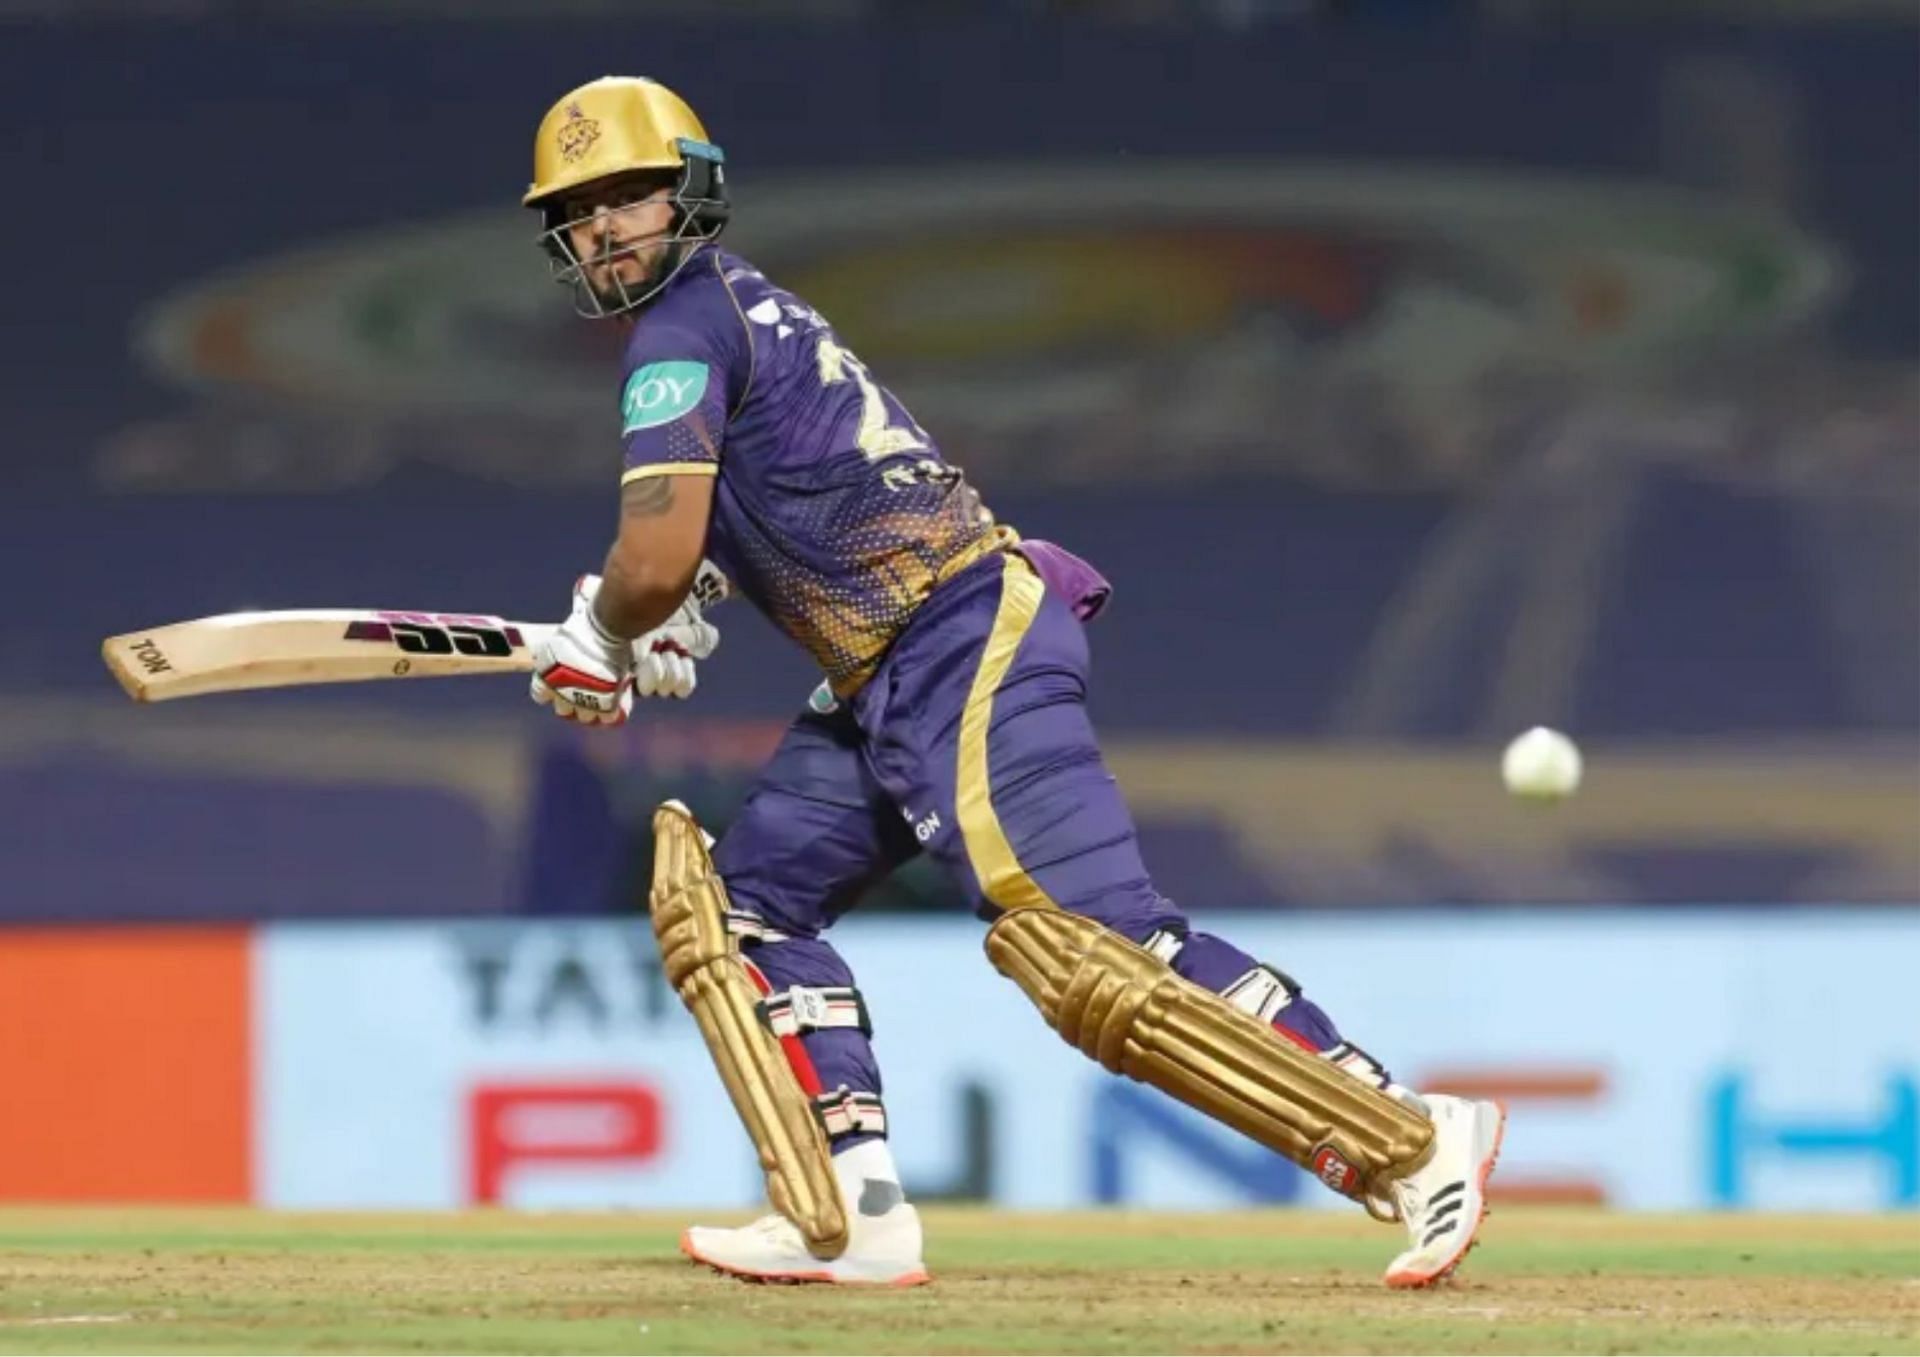 Nitish Rana will take over the reins at KKR for IPL 2023, for the duration Shreyas Iyer remains sidelined (Picture Credits: IPL).